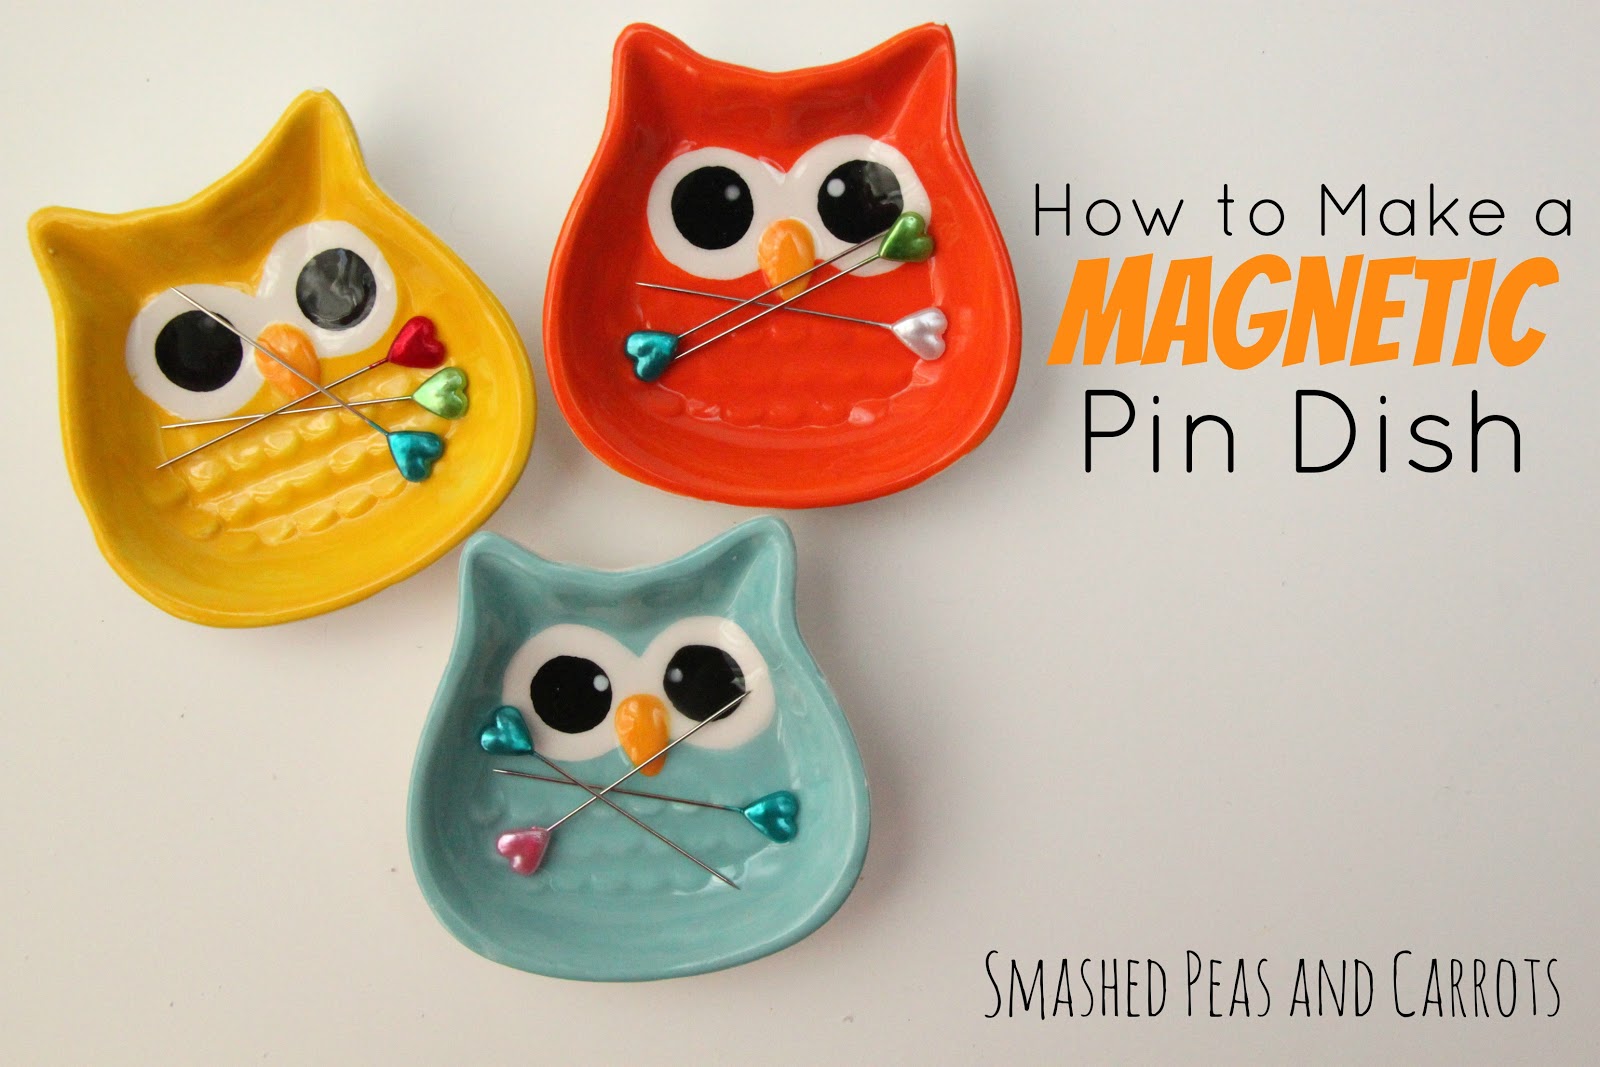 TUTORIAL: How to Make a Magnetic Pin Dish - Smashed Peas & Carrots